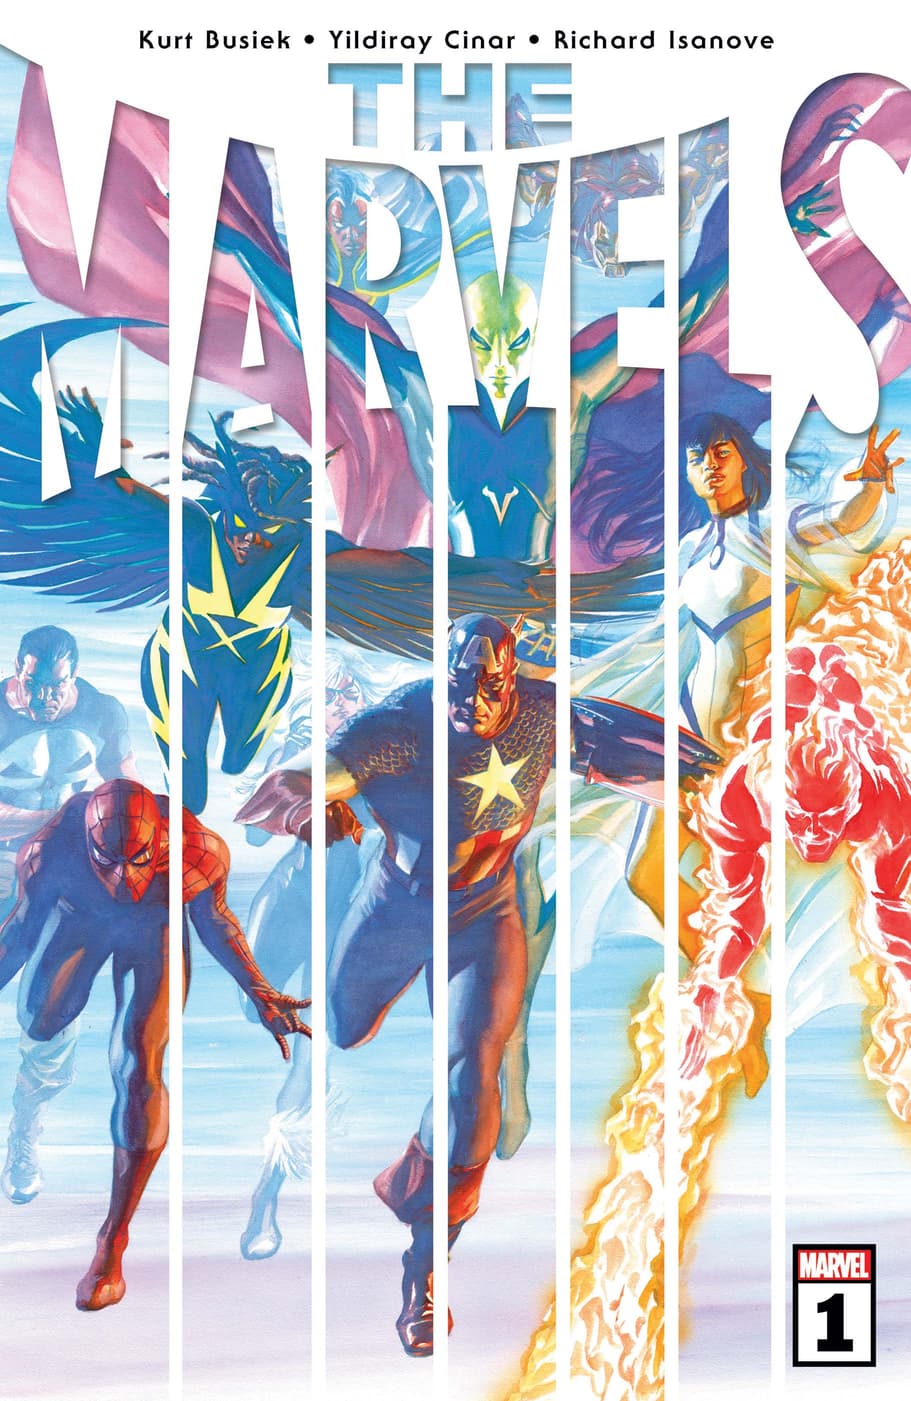 THE MARVELS #1 cover by Alex Ross